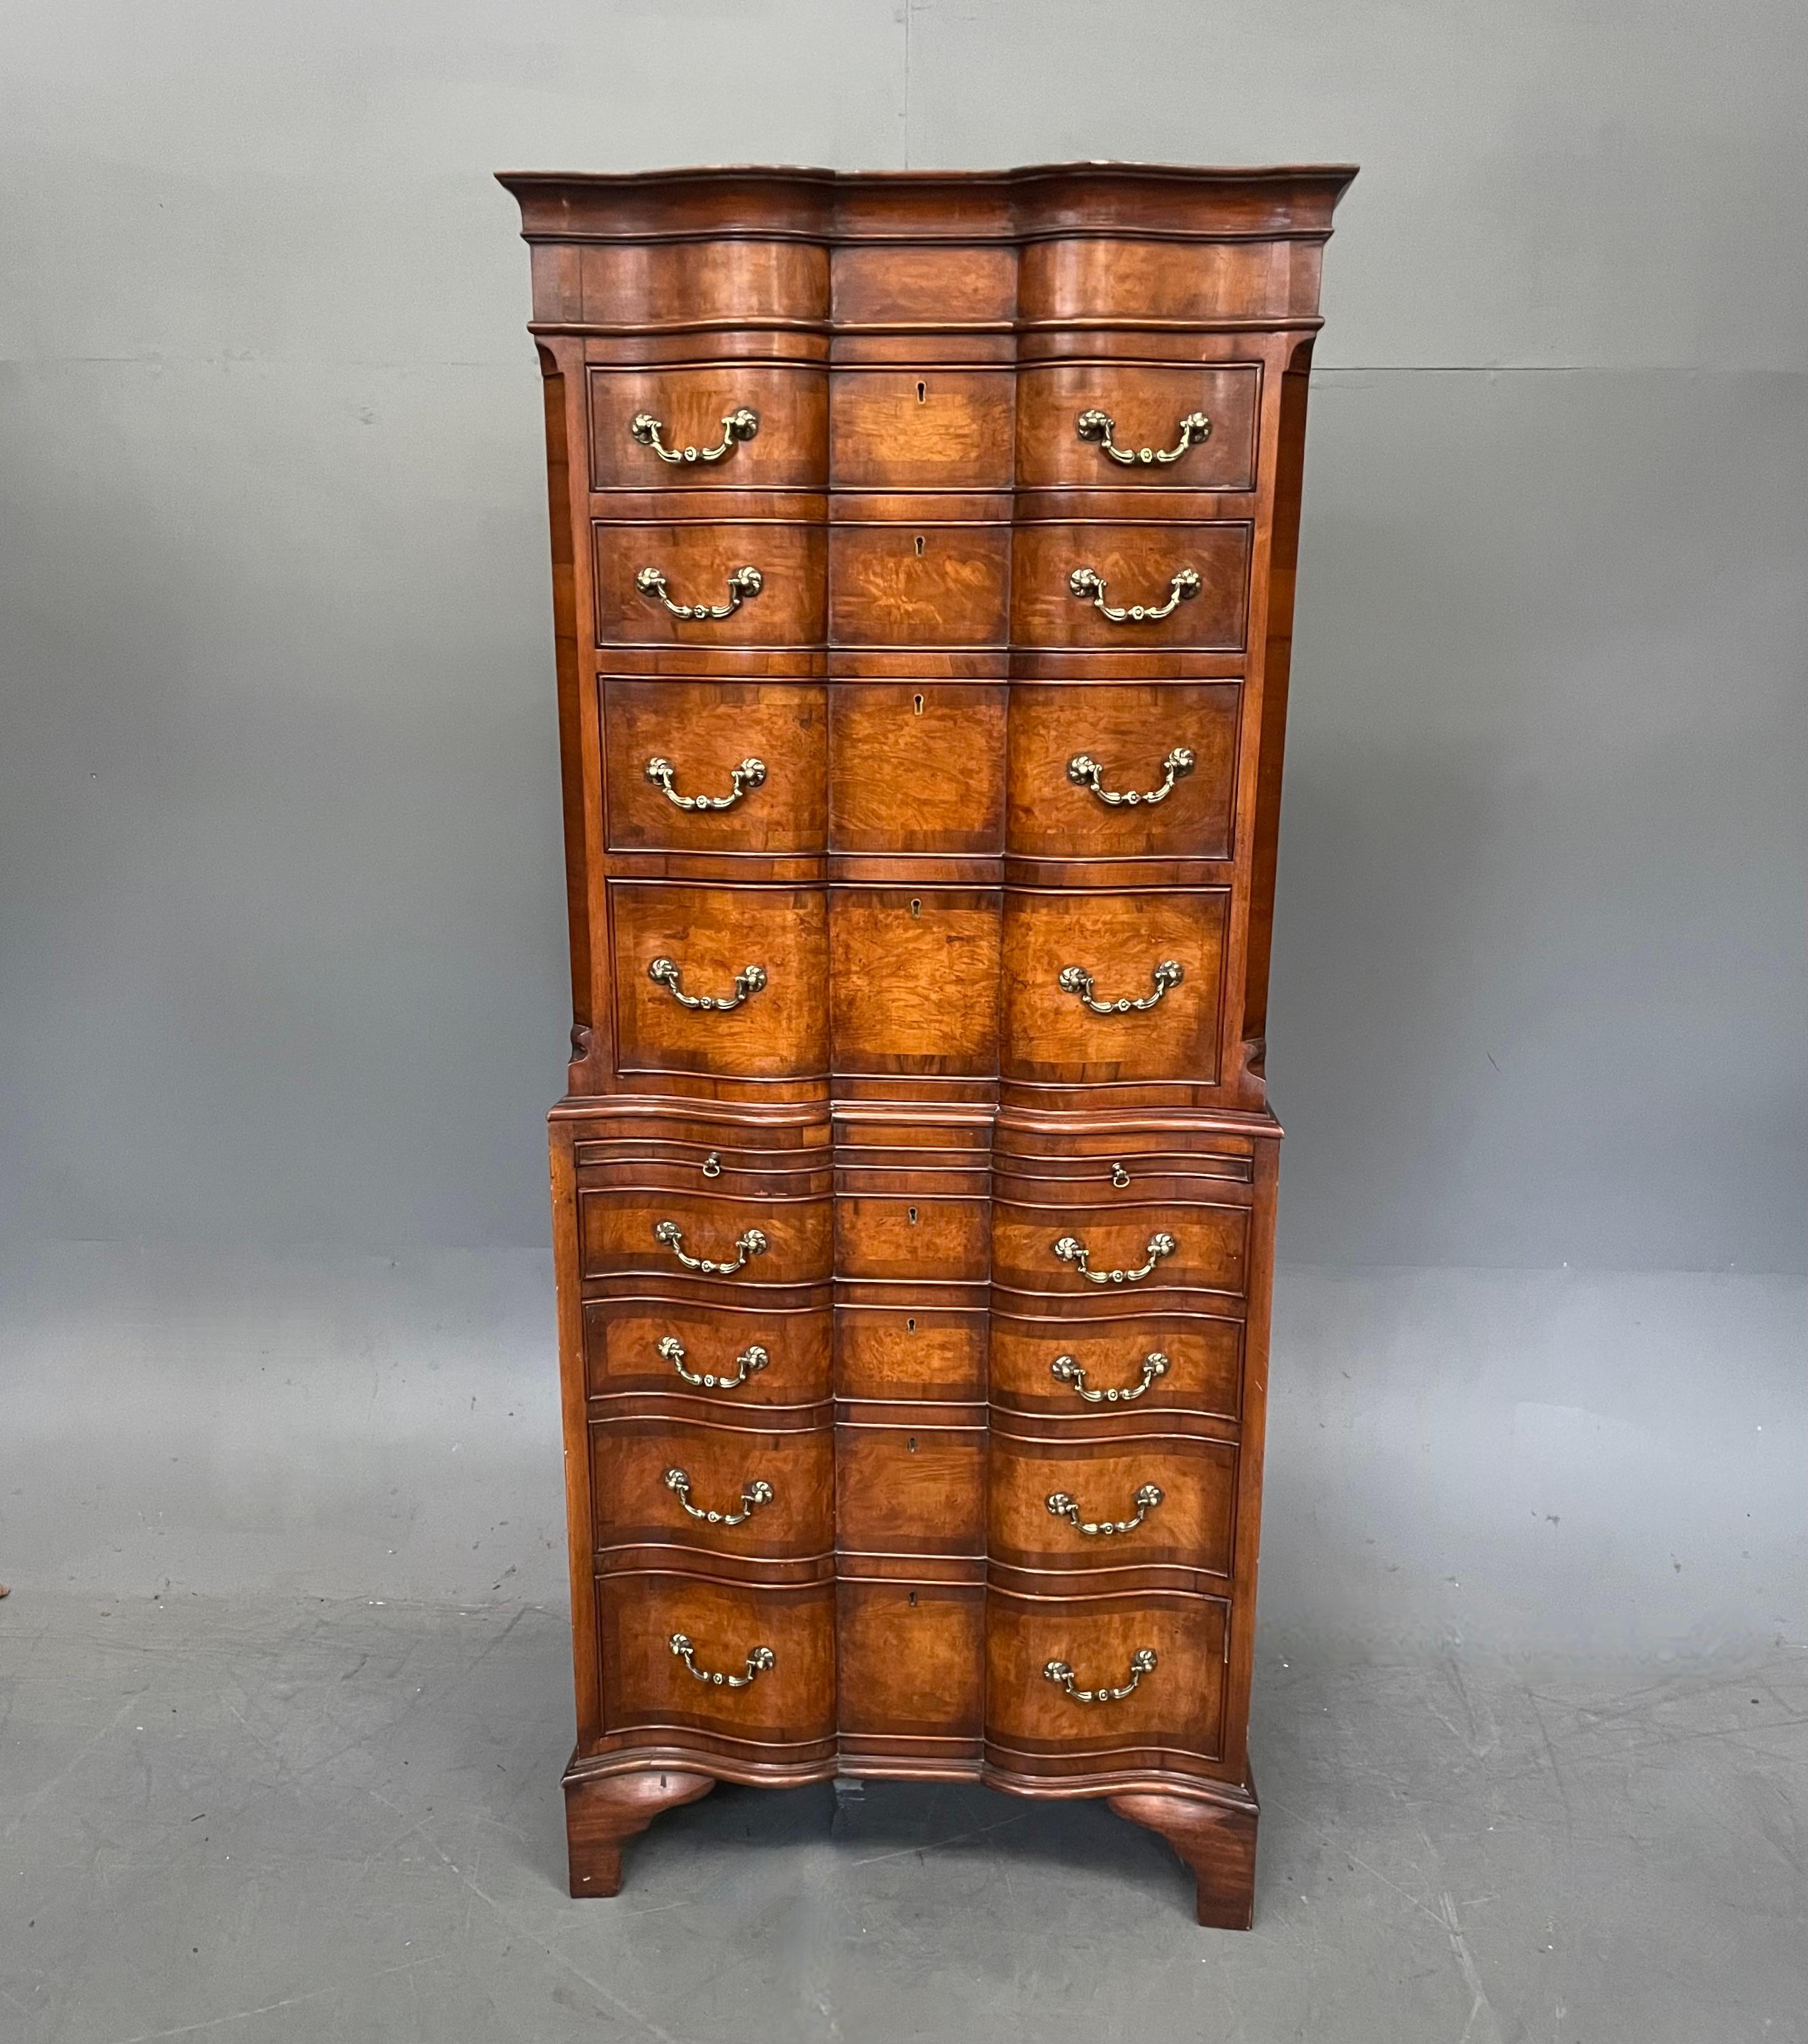 Good quality burr walnut tall boy chest on chest which has a wonderful shaped front with 8 graduating drawers that are hand dovetail jointed with wonderful decorative brass swan neck handles. It has a central brushing slide. It has a great colour